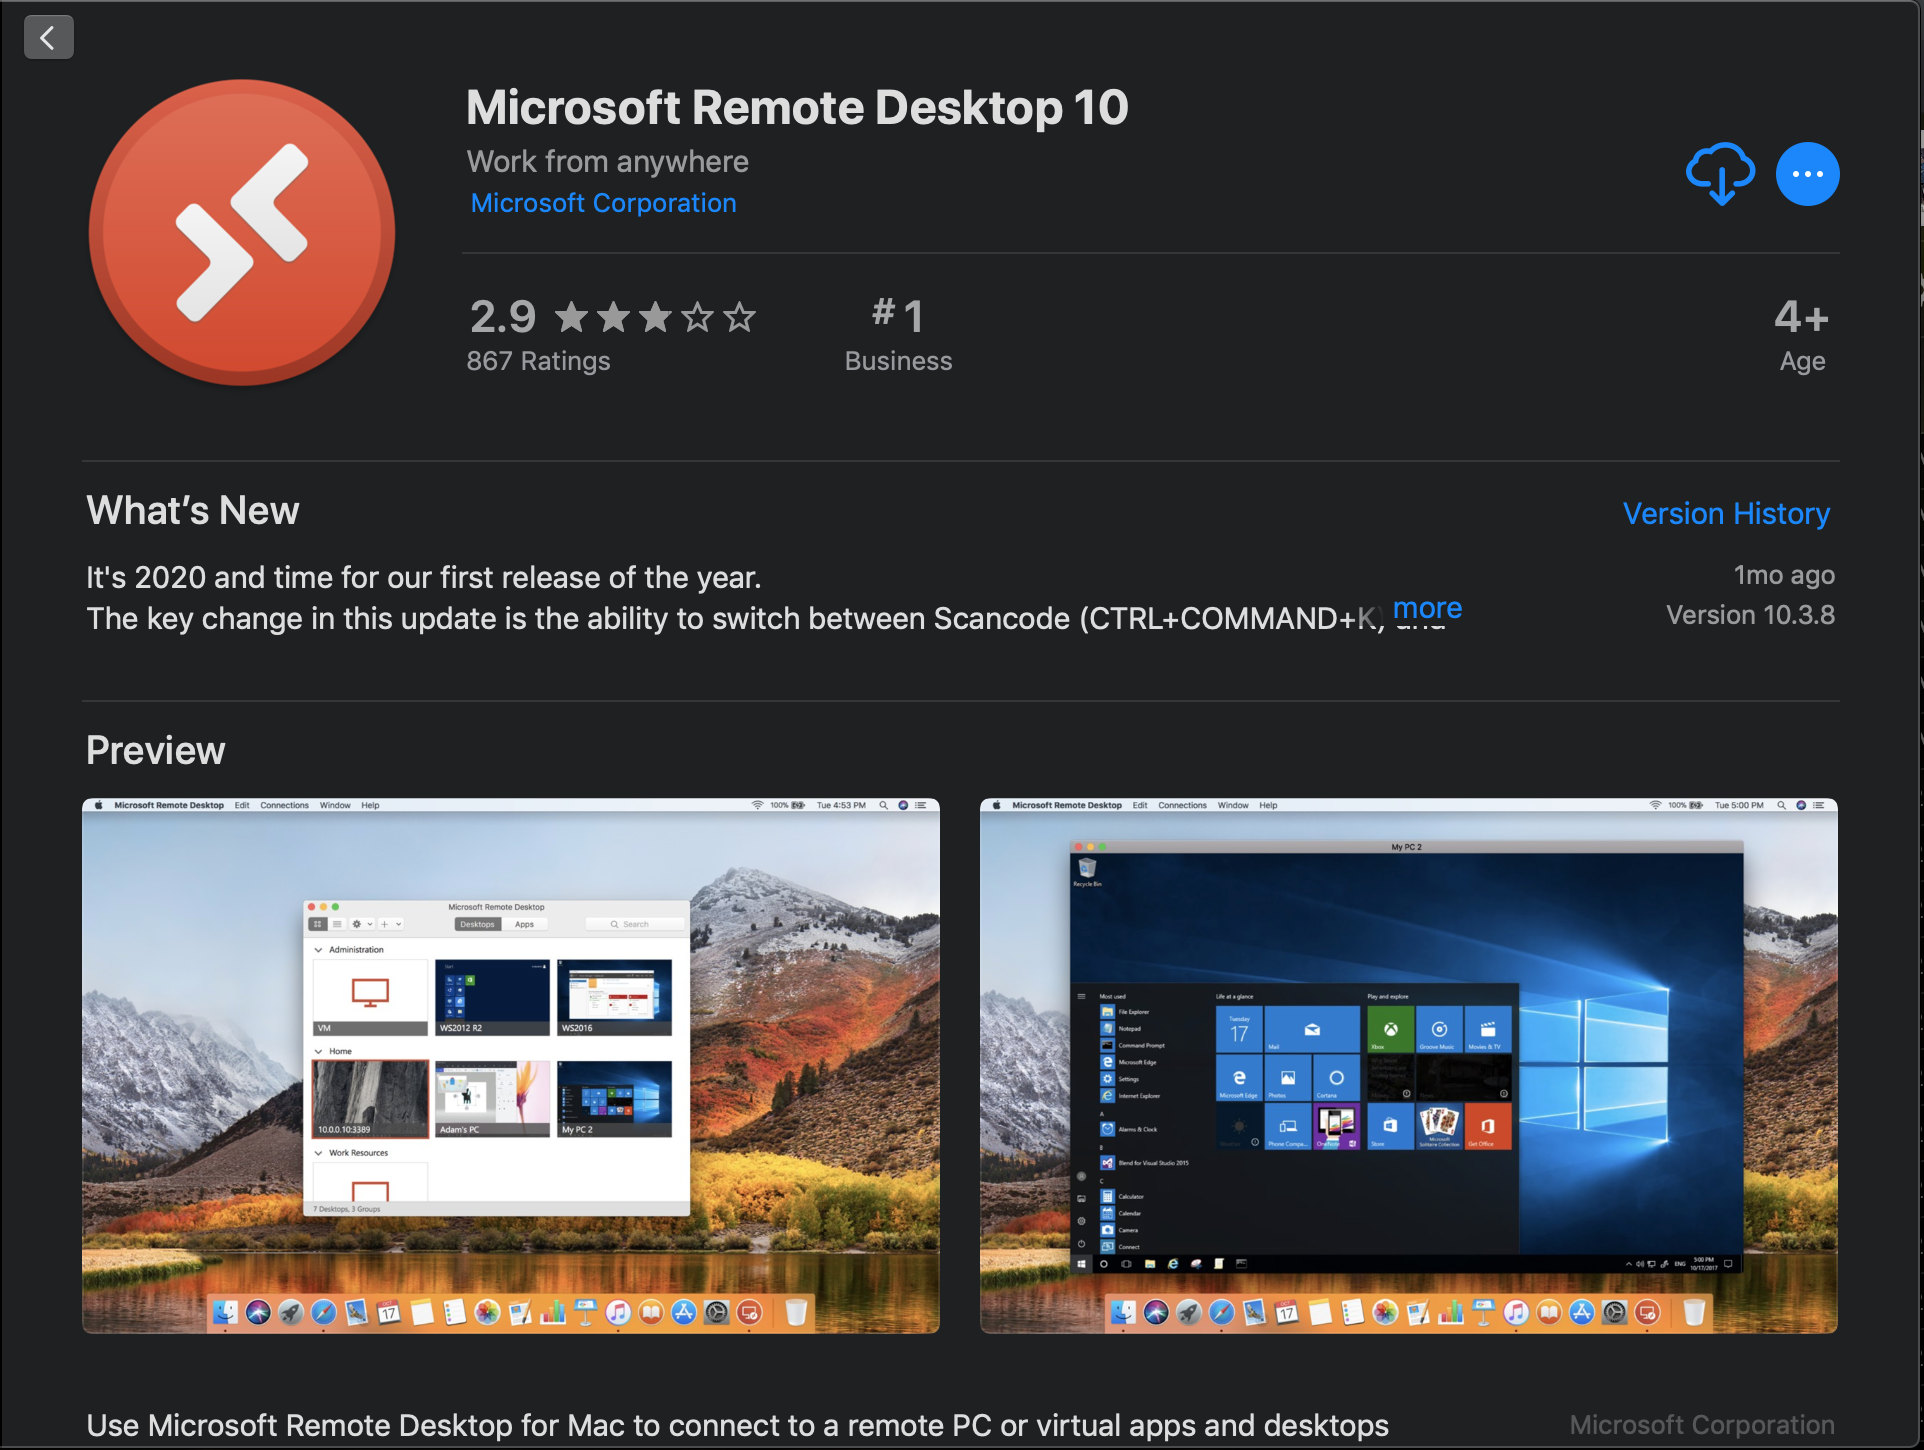 Microsoft App Store page with Microsoft Remote Desktop 10 installation page